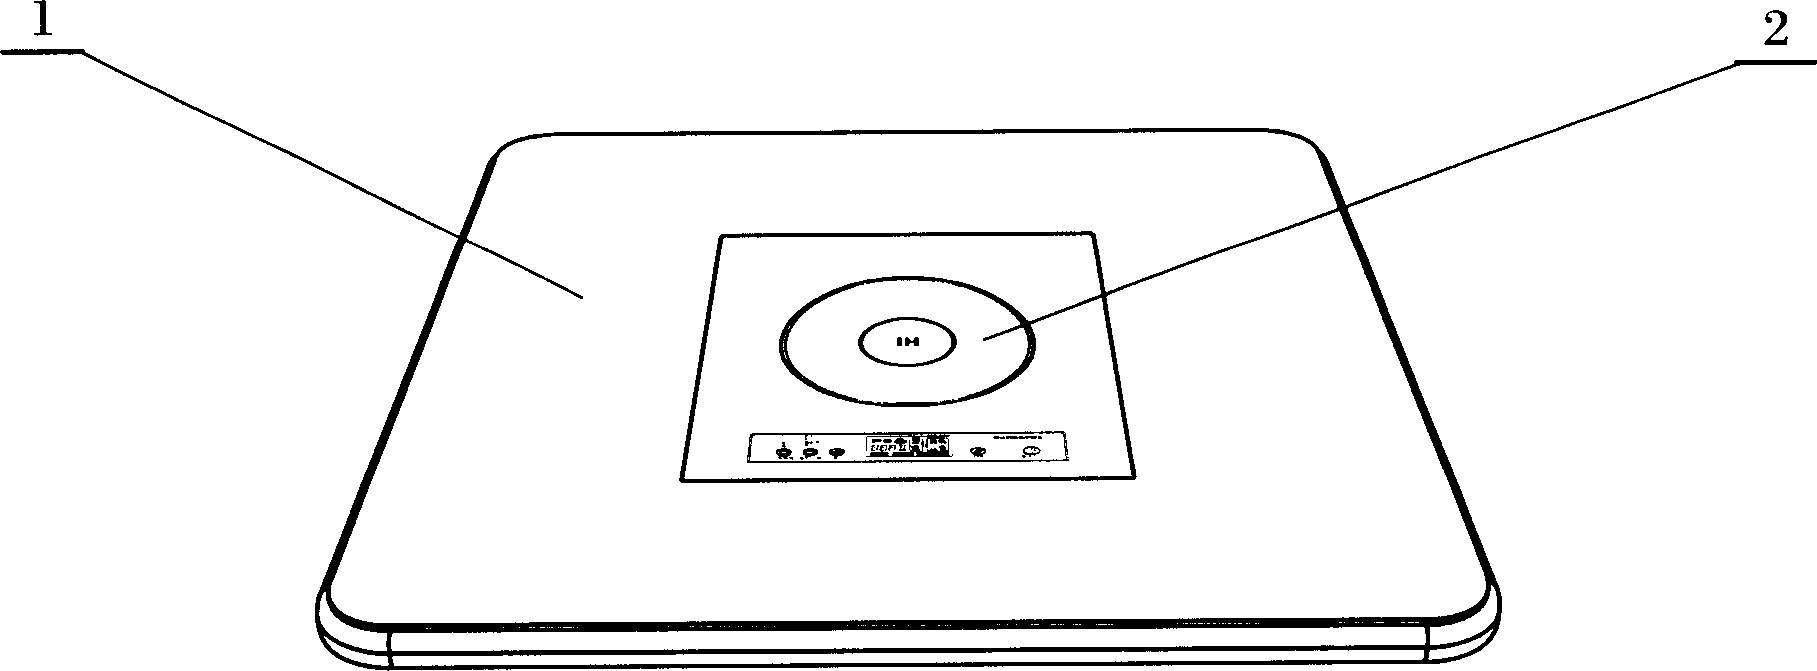 Electromagnetic oven panel structure